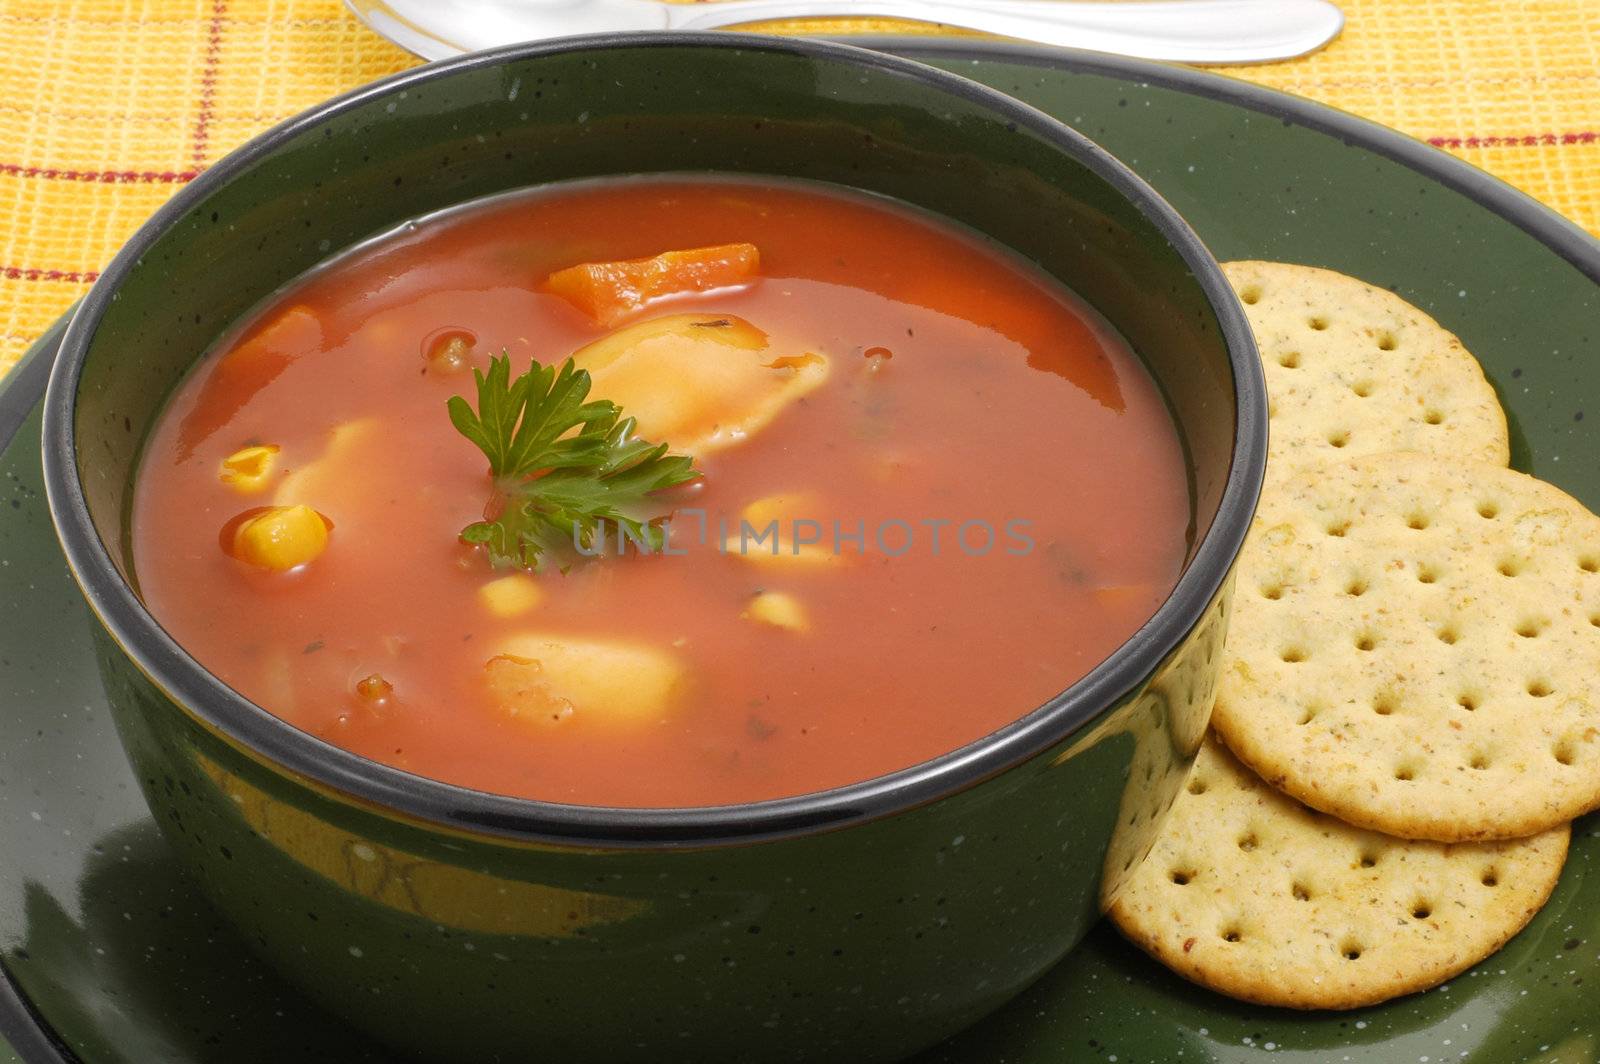 Bowl of hearty vegetable soup and crackers.